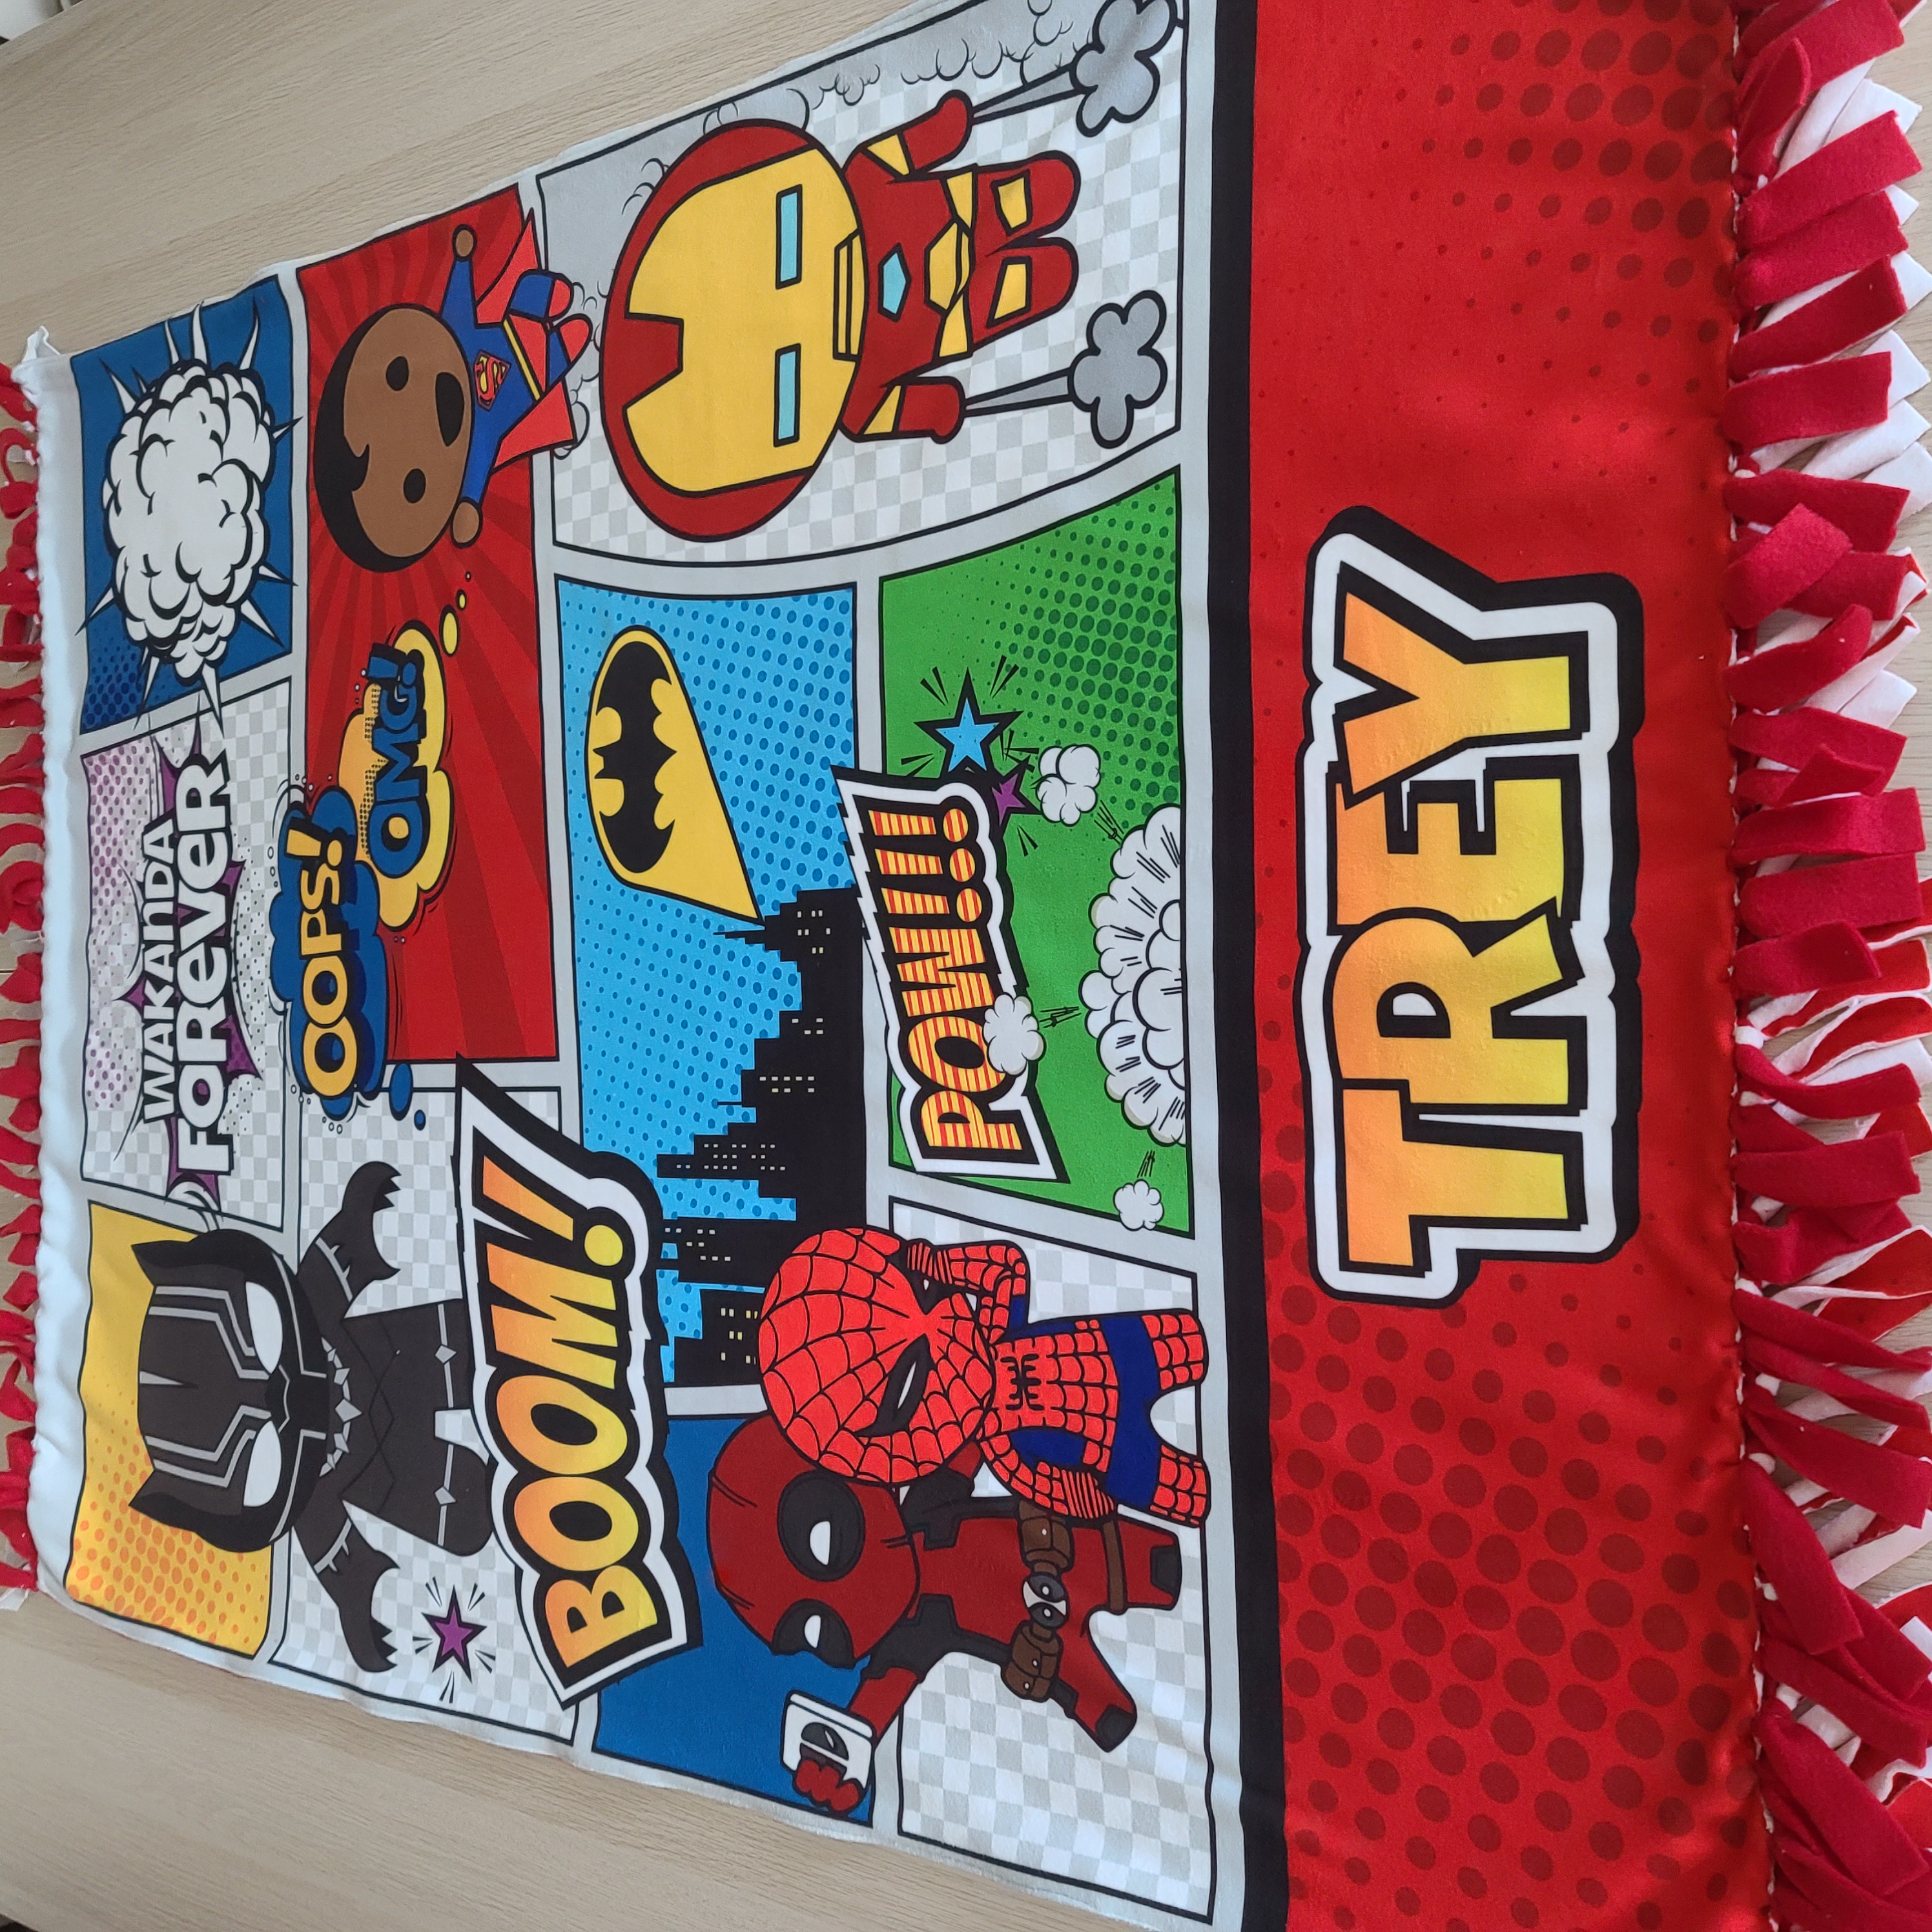 Baby Superhero Throw Blanket (Quarterly Contest) made with sublimation printing